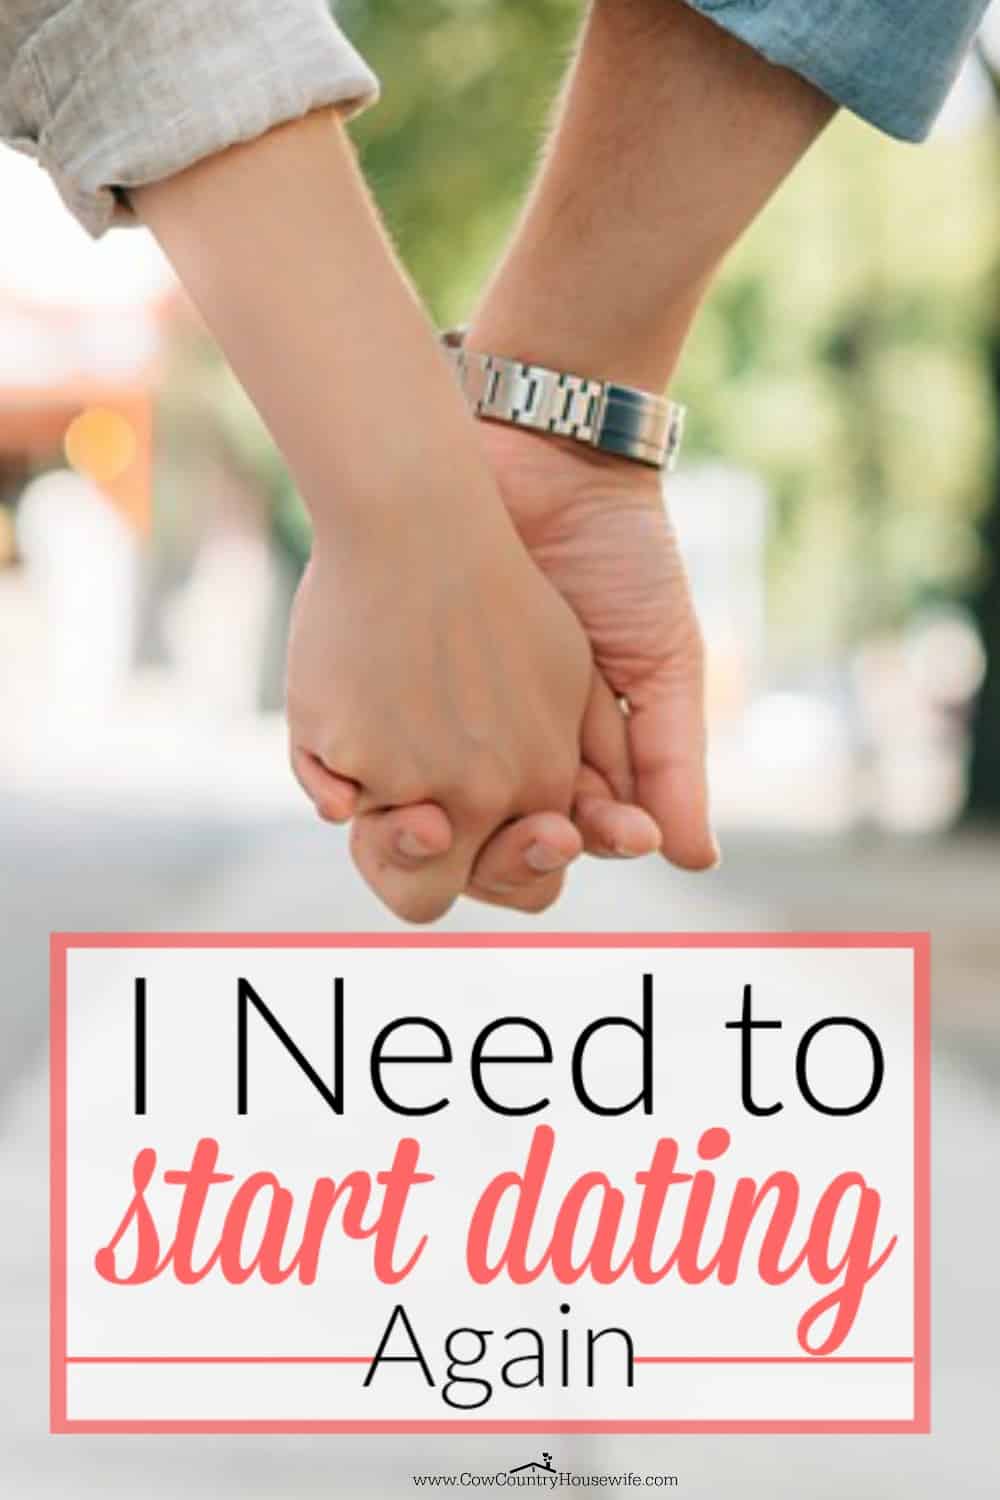 After feeling unappreciated by my husband, I decided that I needed to do something different: I need to start dating again!